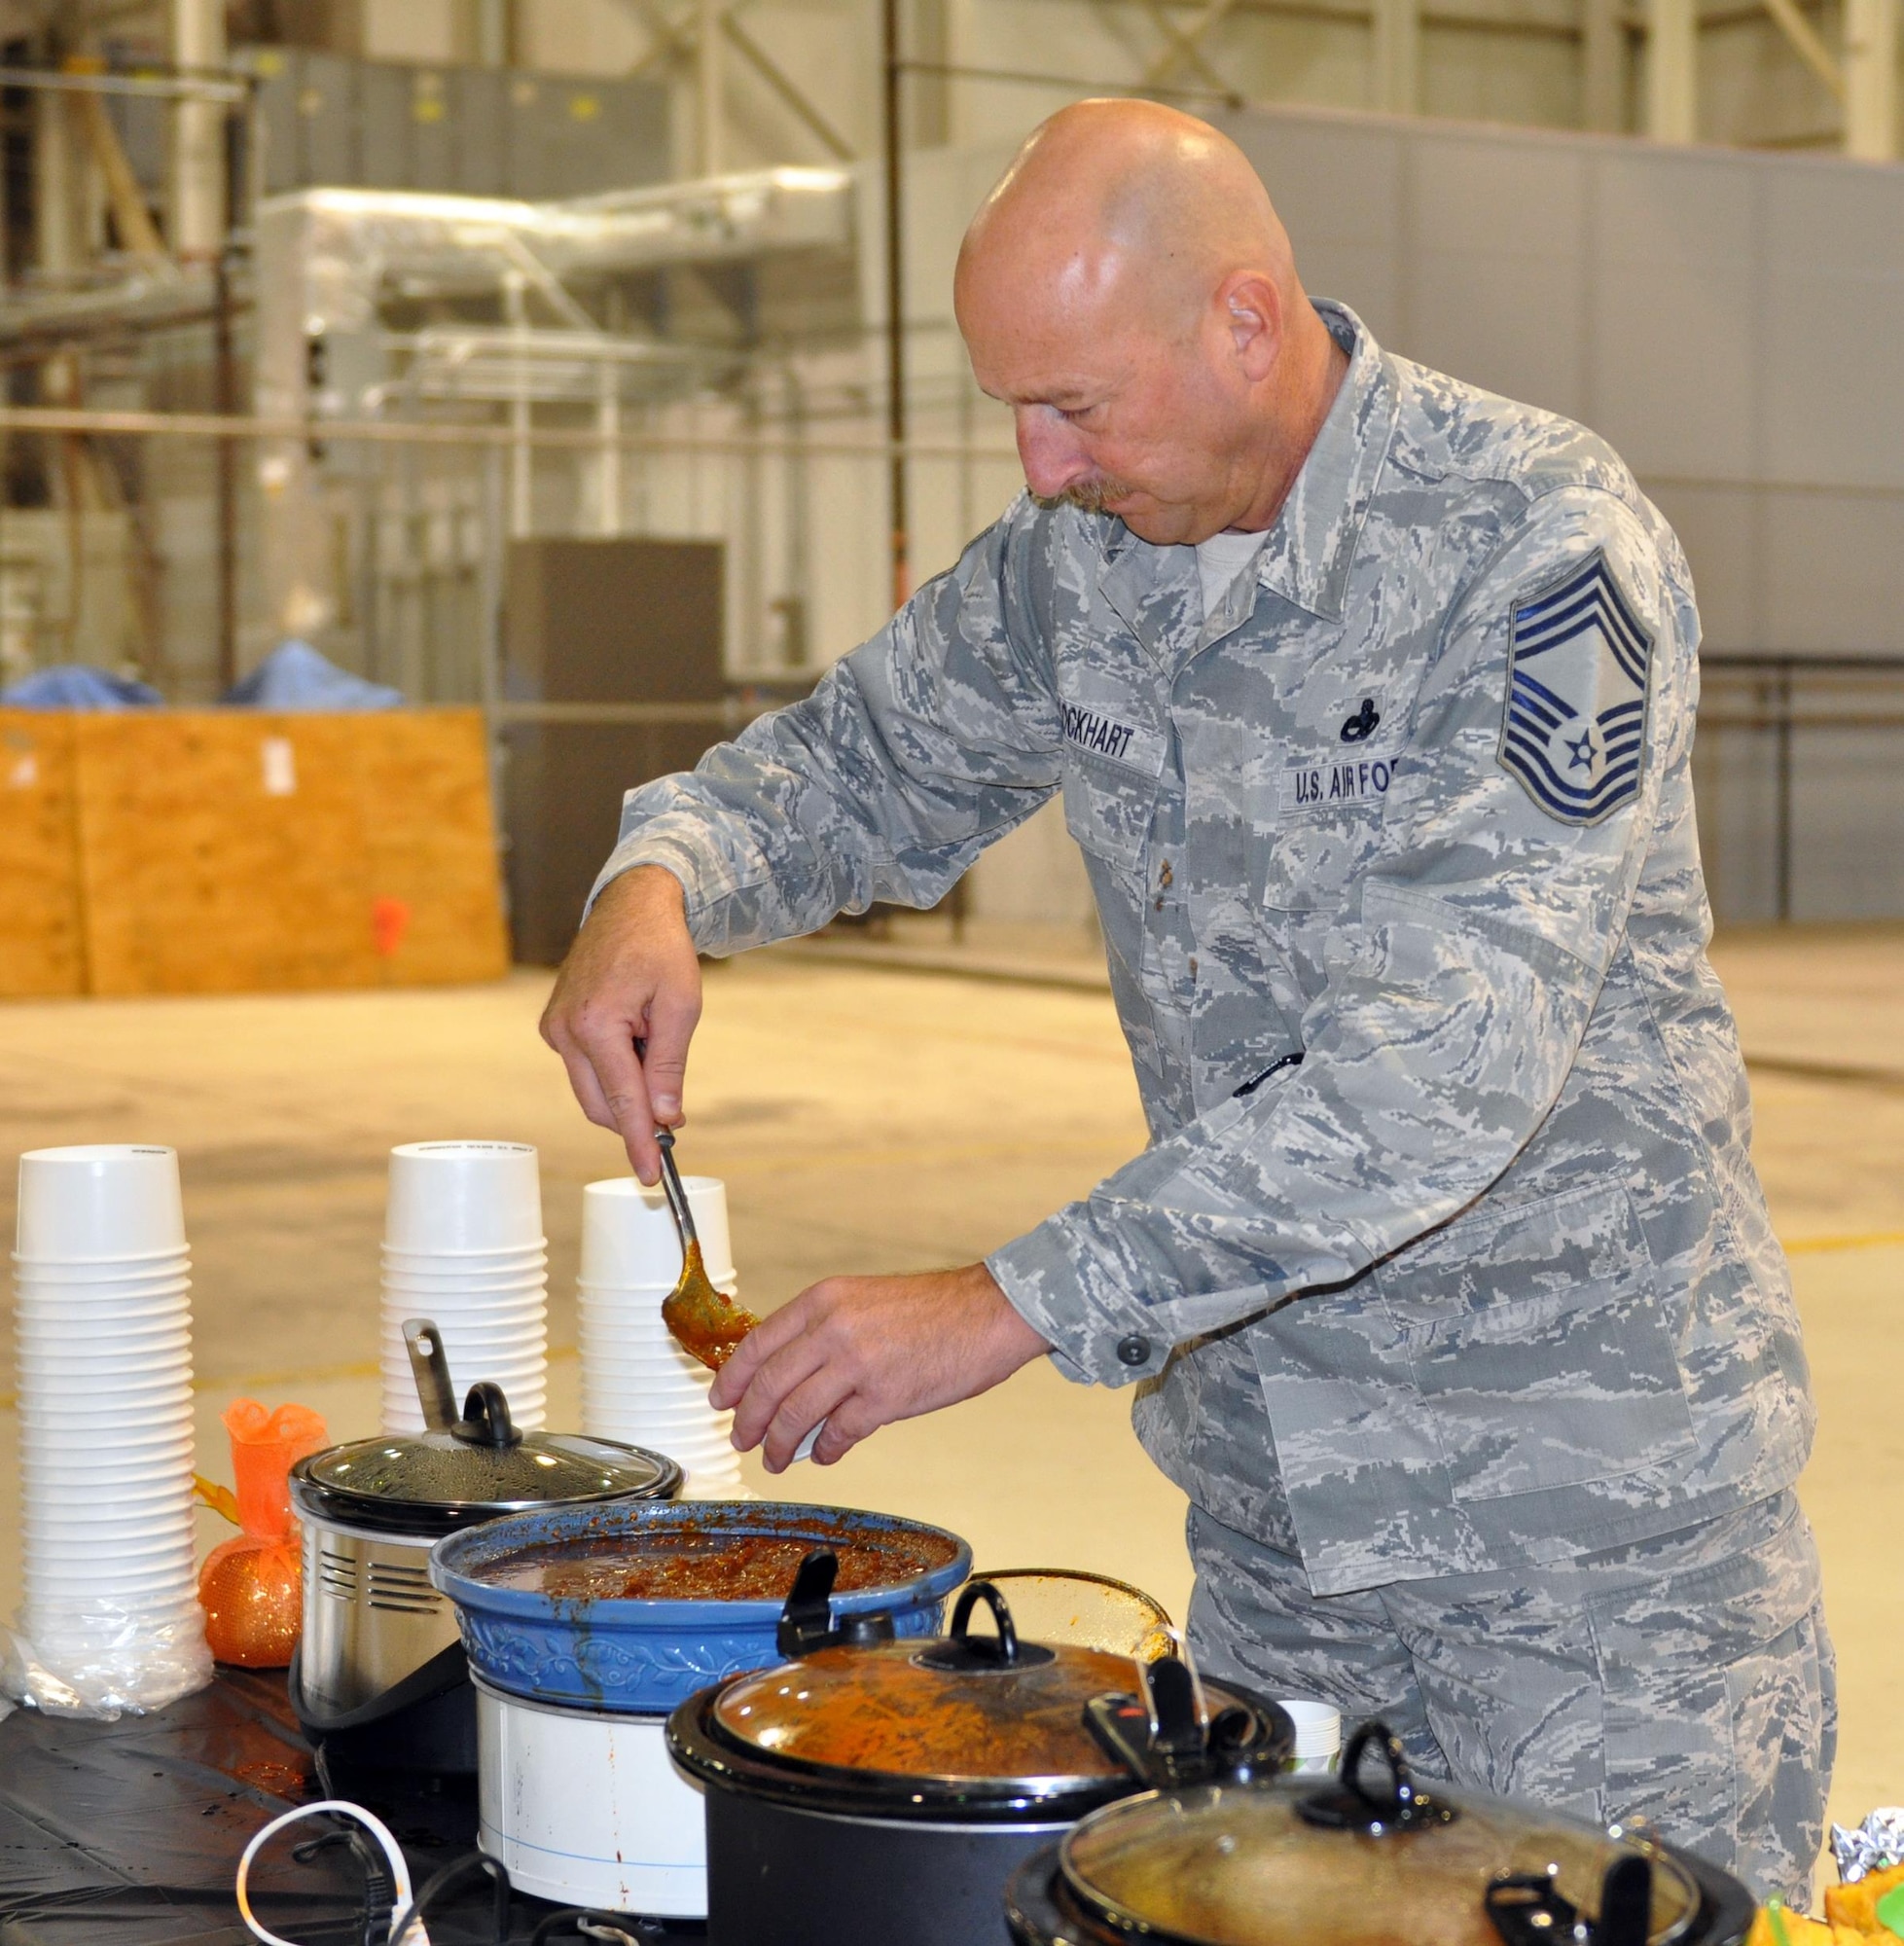 Chief Master Sgt. Mark Lockhart, 445th Maintenance Group superintendent, prepares to sample one of 17 pots of chili while serving as a judge during the 445th Airlift Wing’s 16th Annual Chili Cook-off Oct. 27, 2016. The event raised $400 for the Combined Federal Campaign. (U.S. Air Force photo/Stacy Vaughn)    